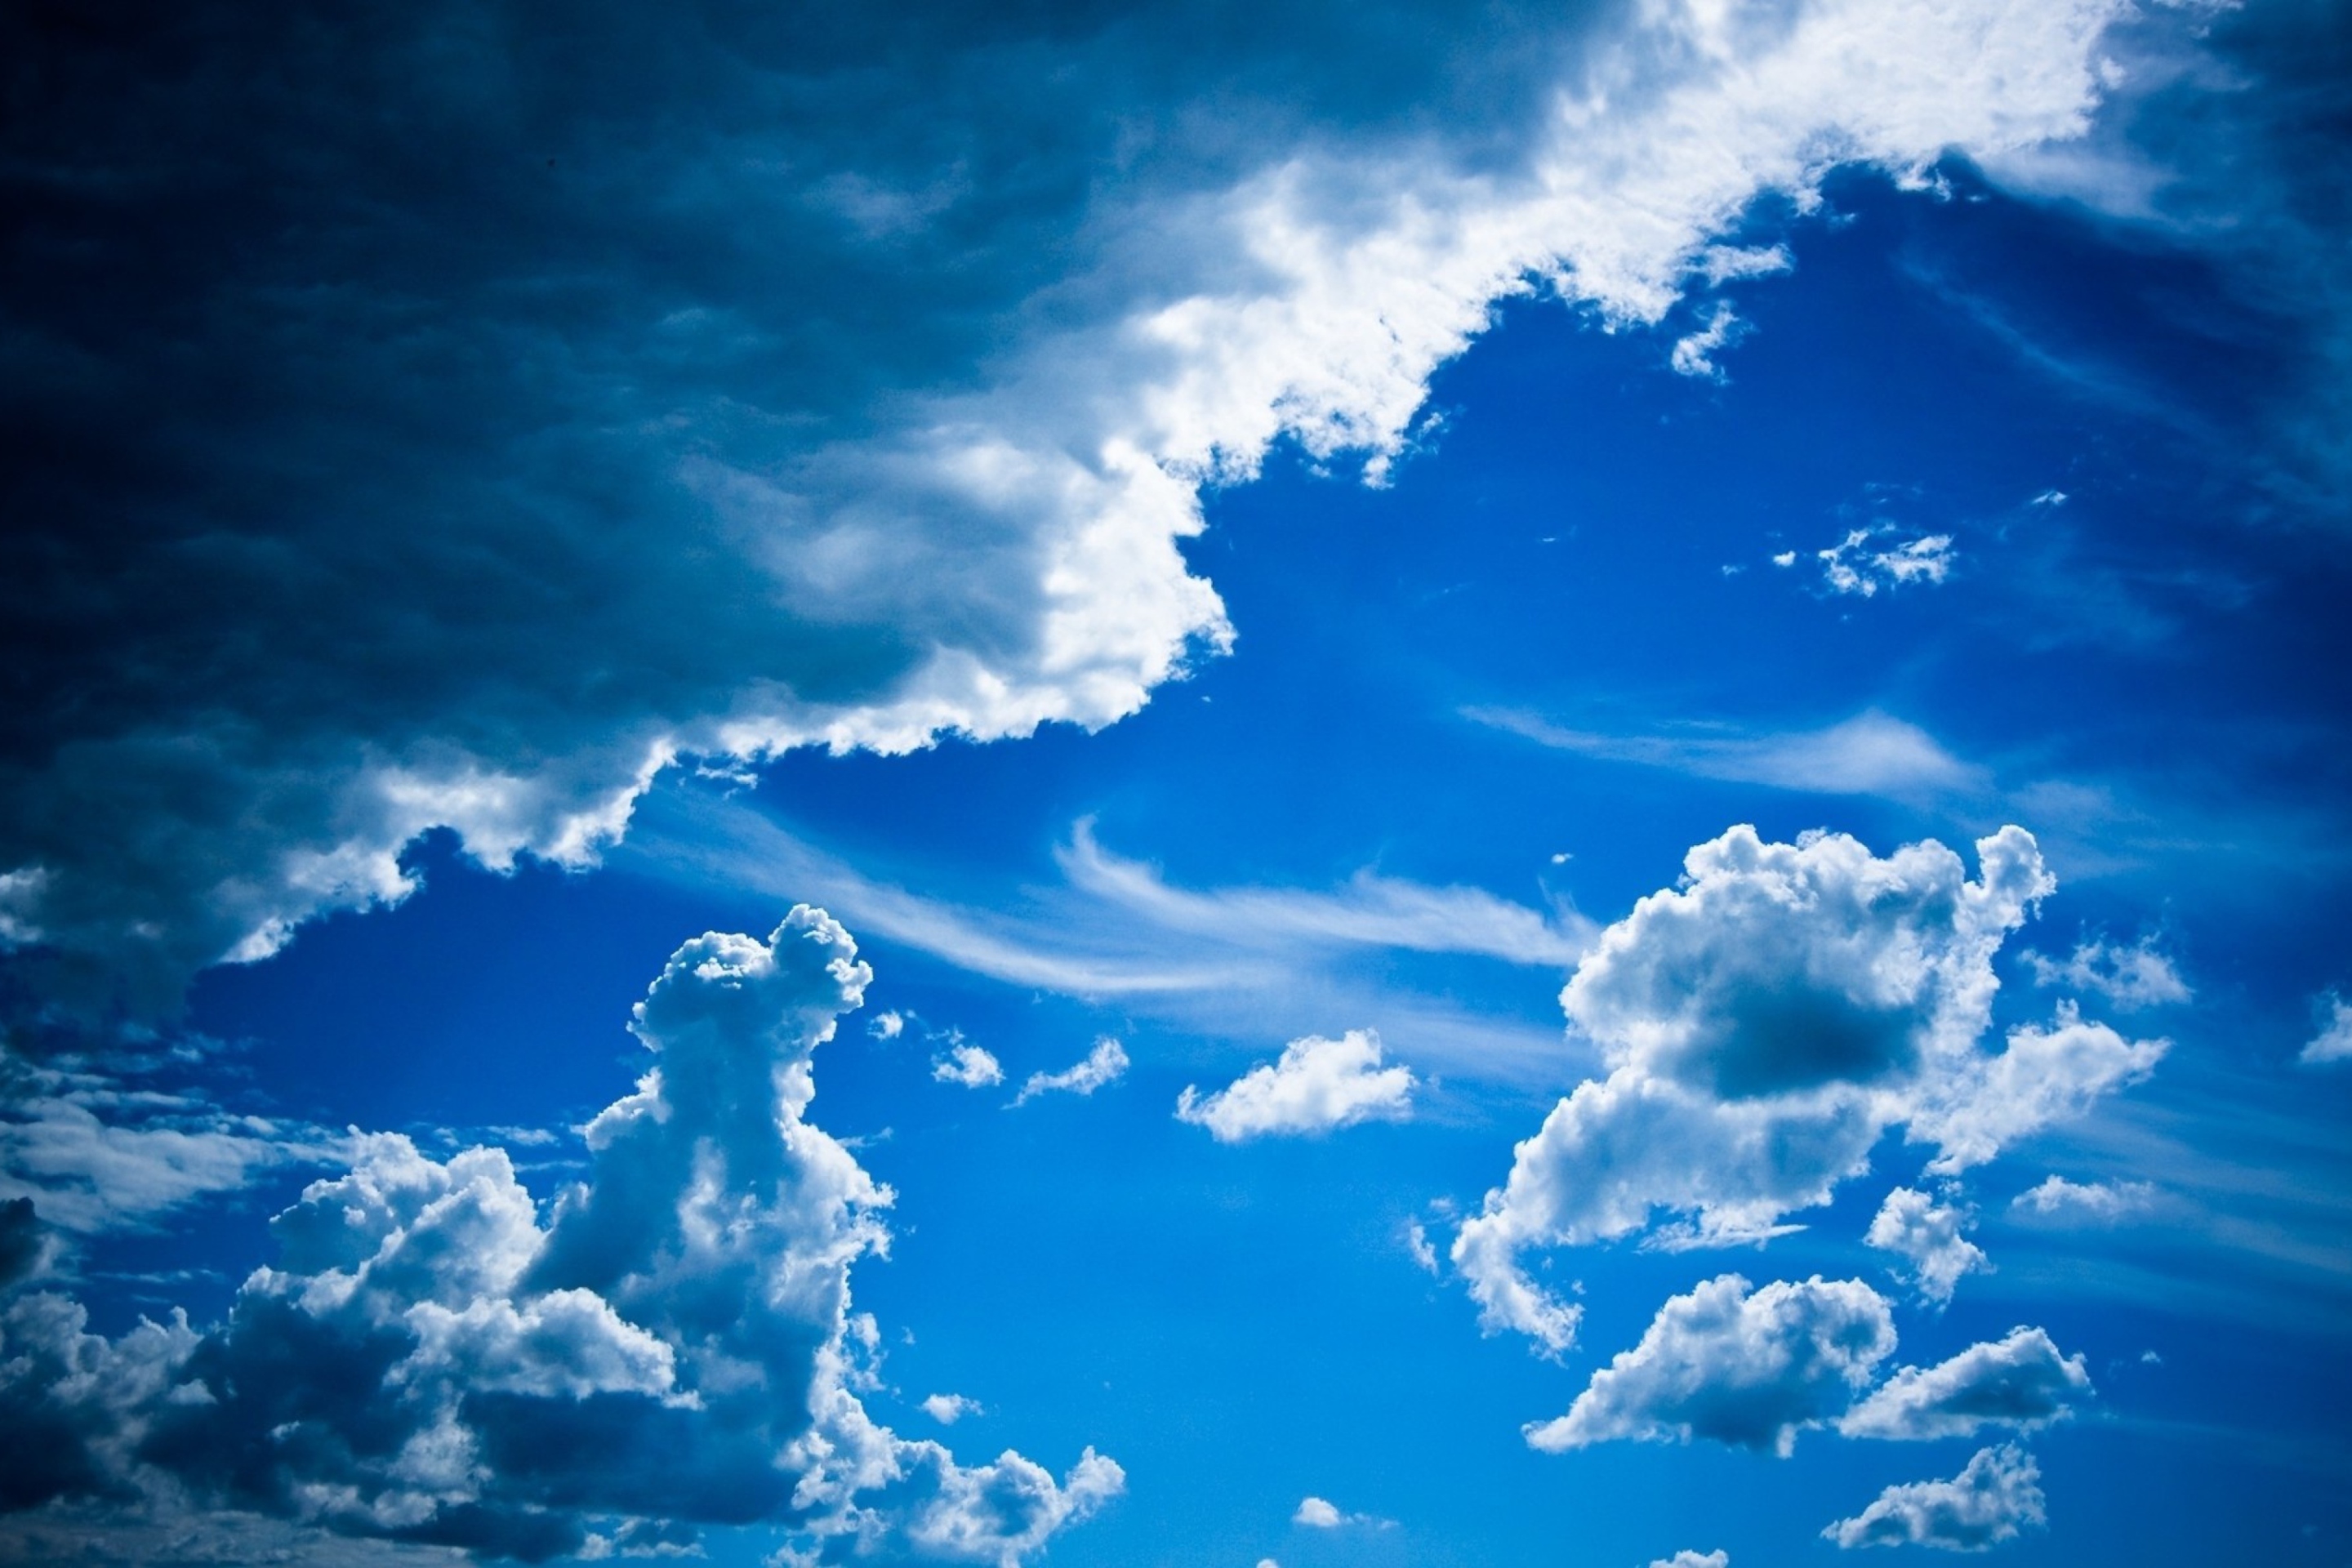 Blue Sky And Clouds wallpaper 2880x1920